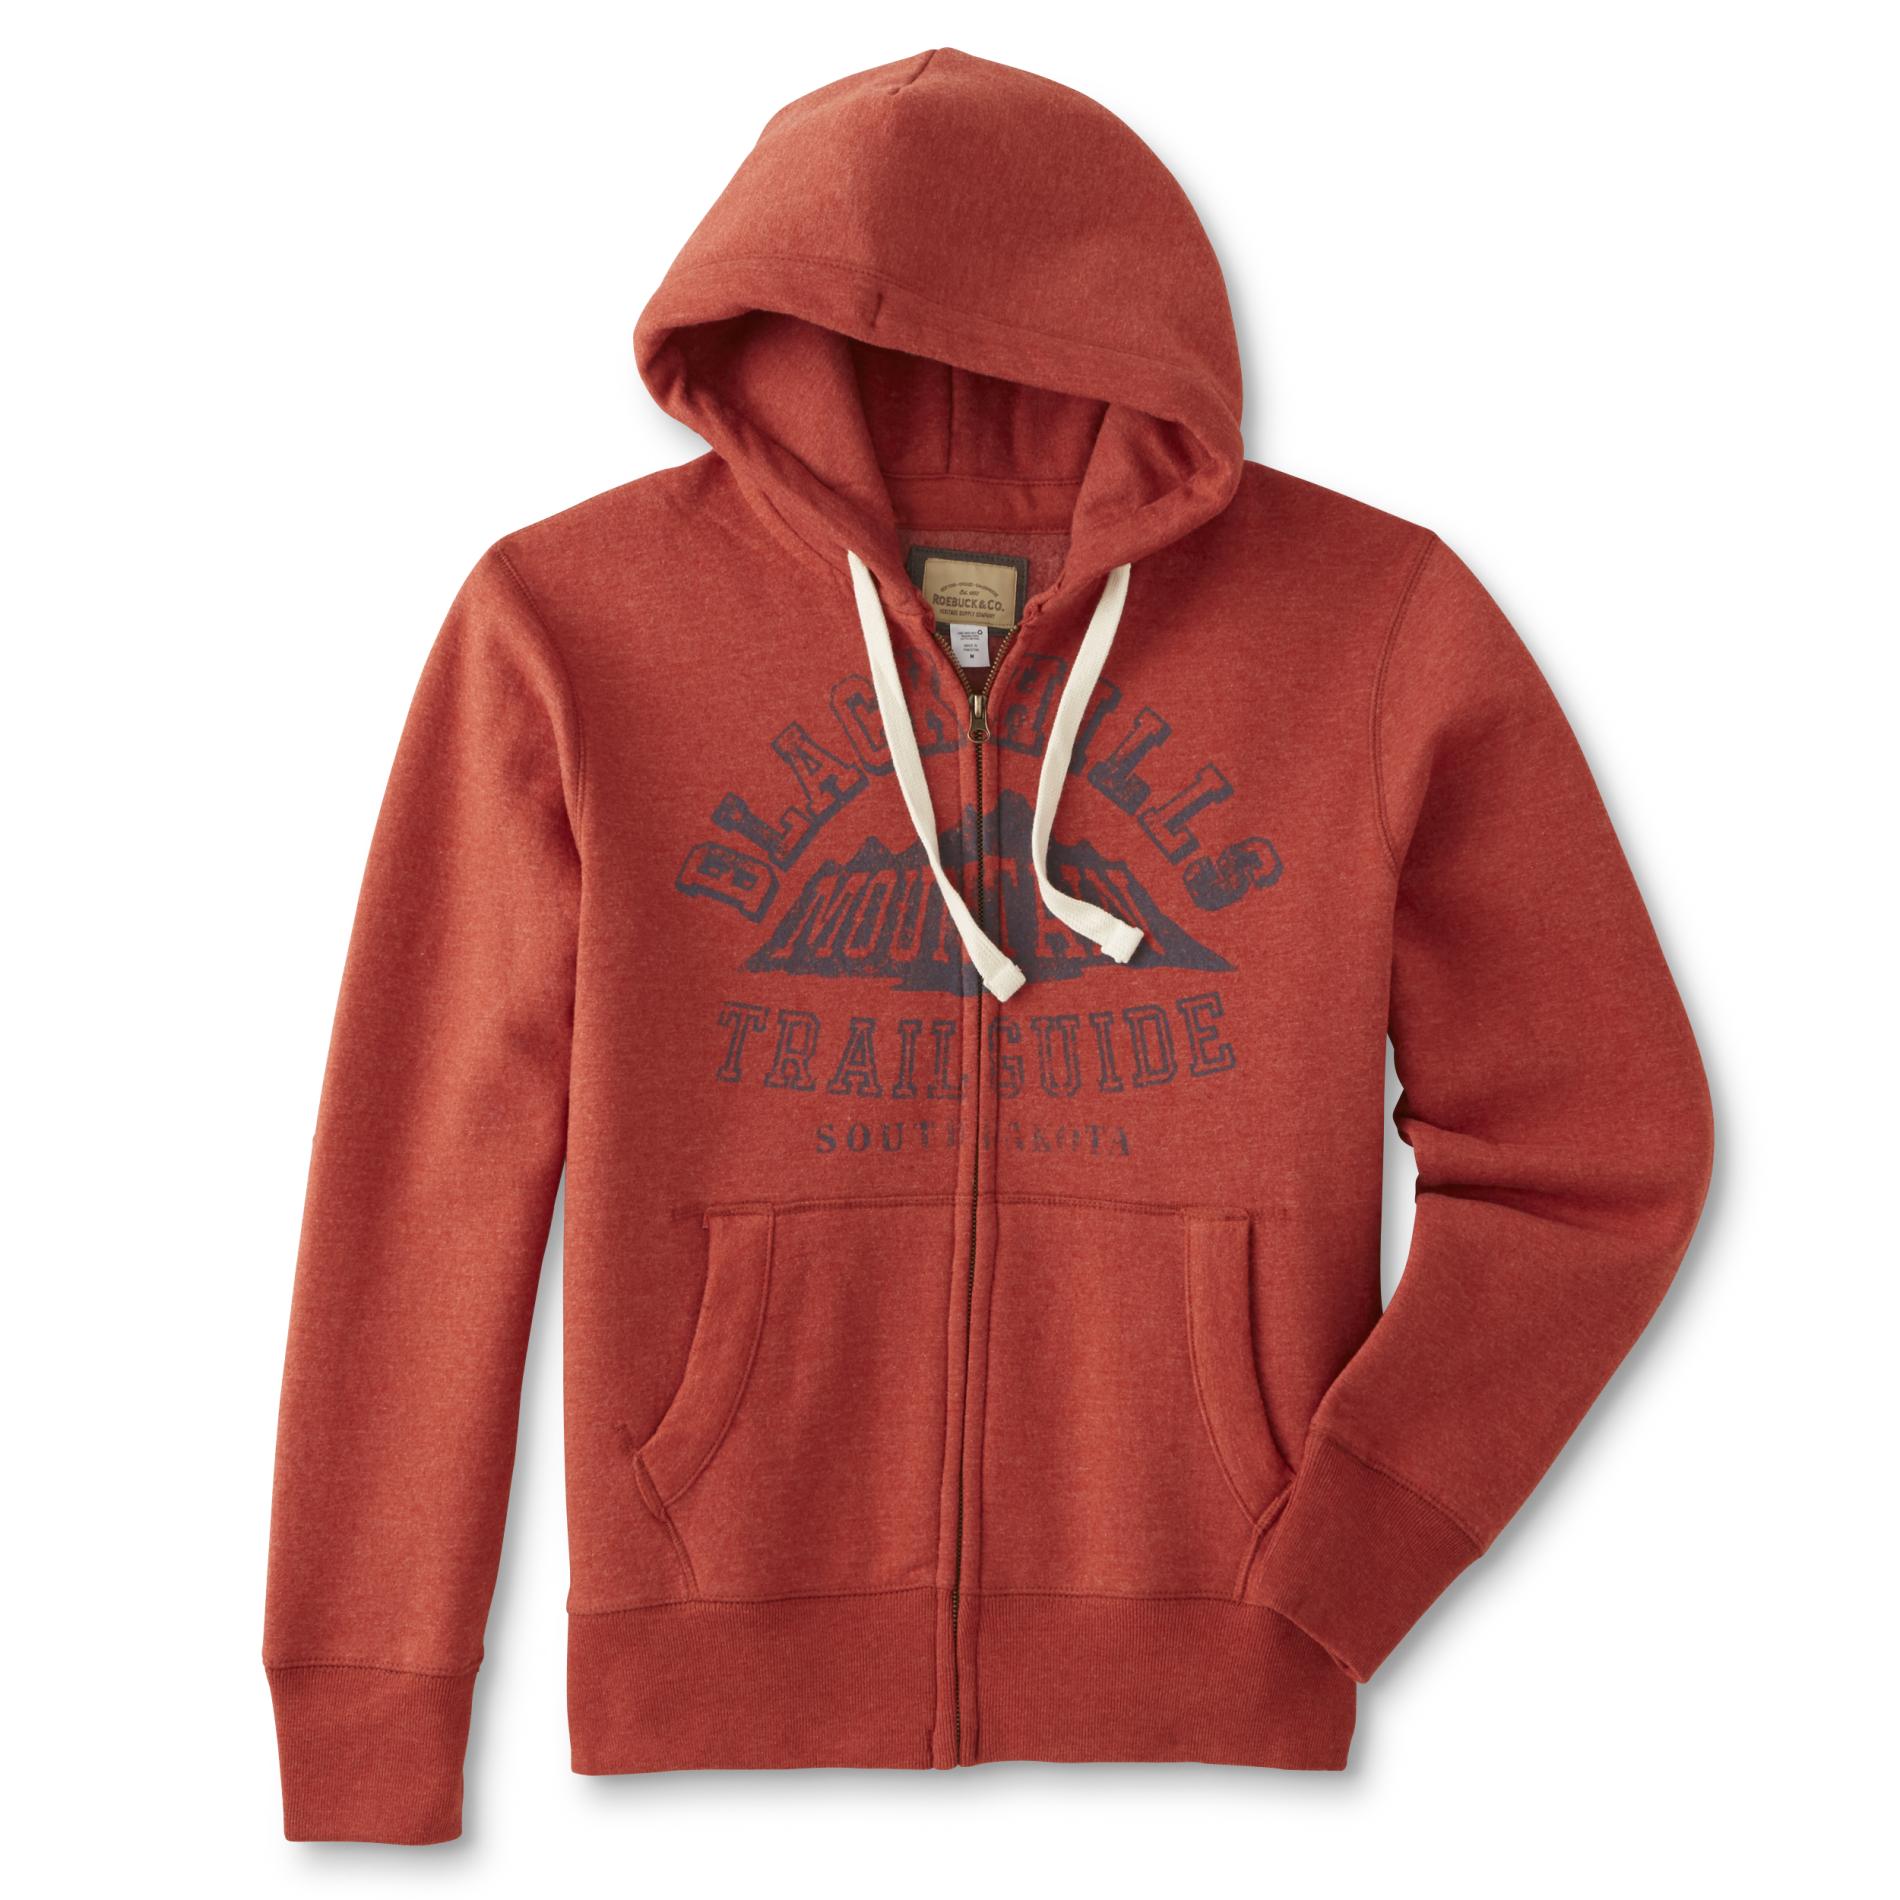 Roebuck & Co. Young Men's Graphic Hoodie Jacket - Mountain Trail Guide